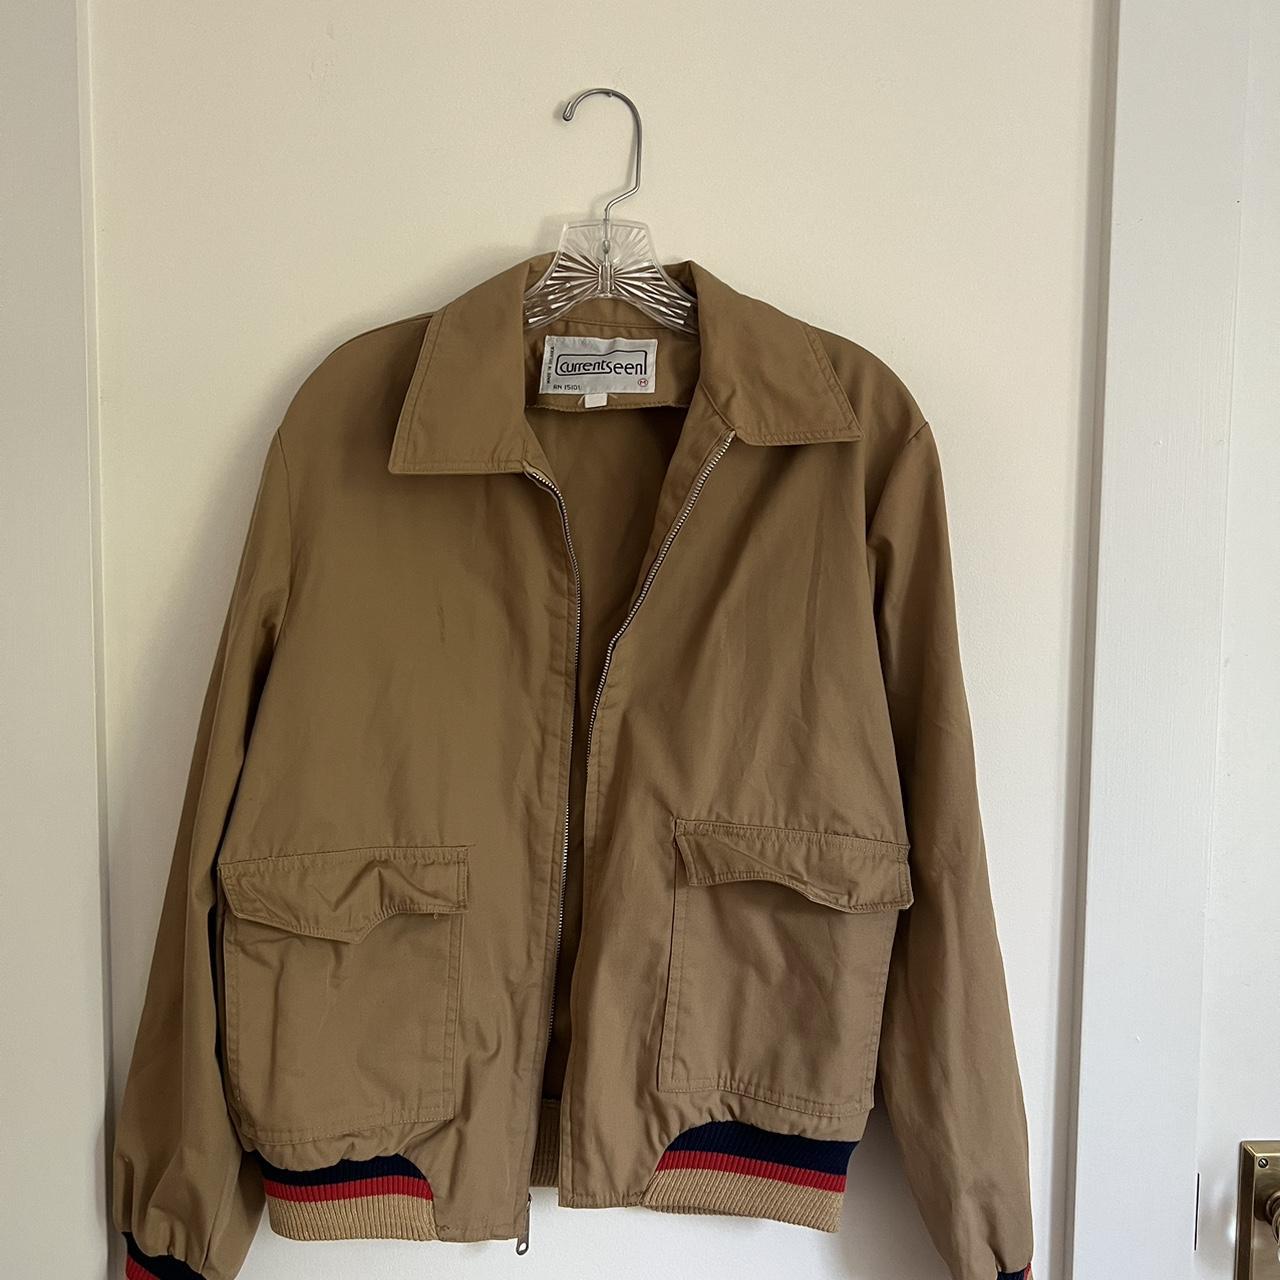 Current Seen Women's Tan and Red Jacket